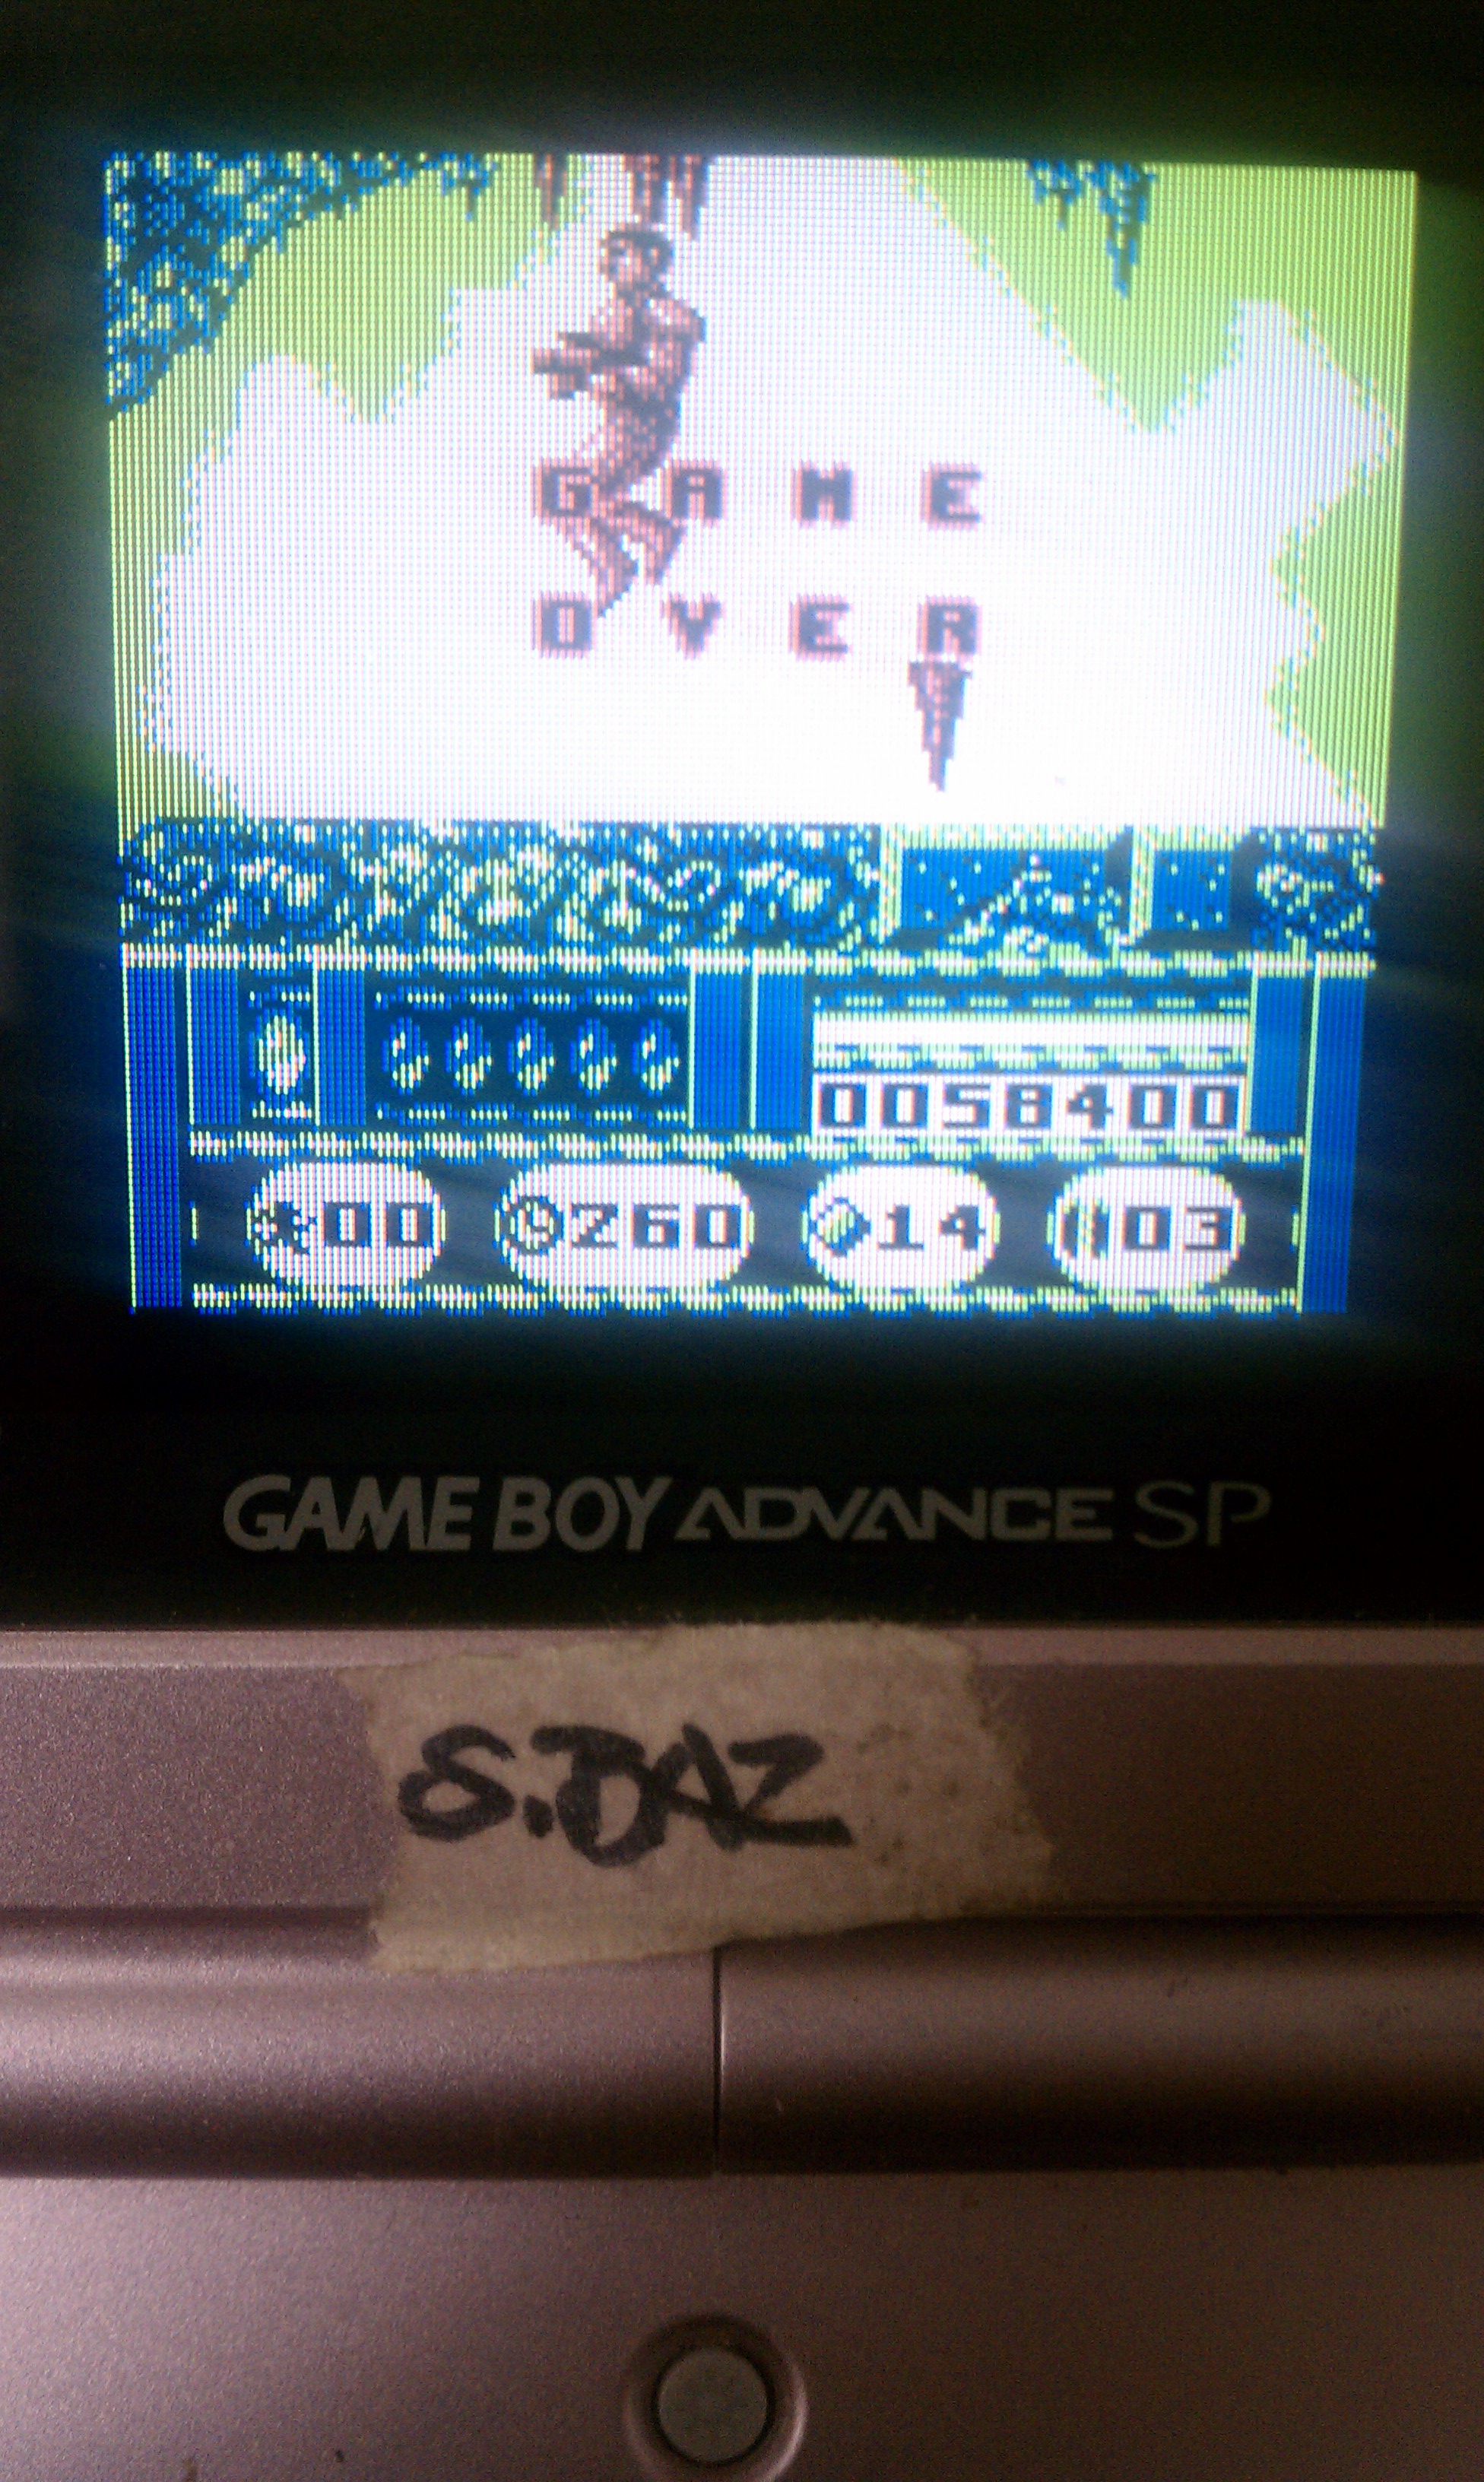 S.BAZ: Universal Soldier [Easy: 5 Lives] (Game Boy) 58,400 points on 2020-03-18 22:41:51